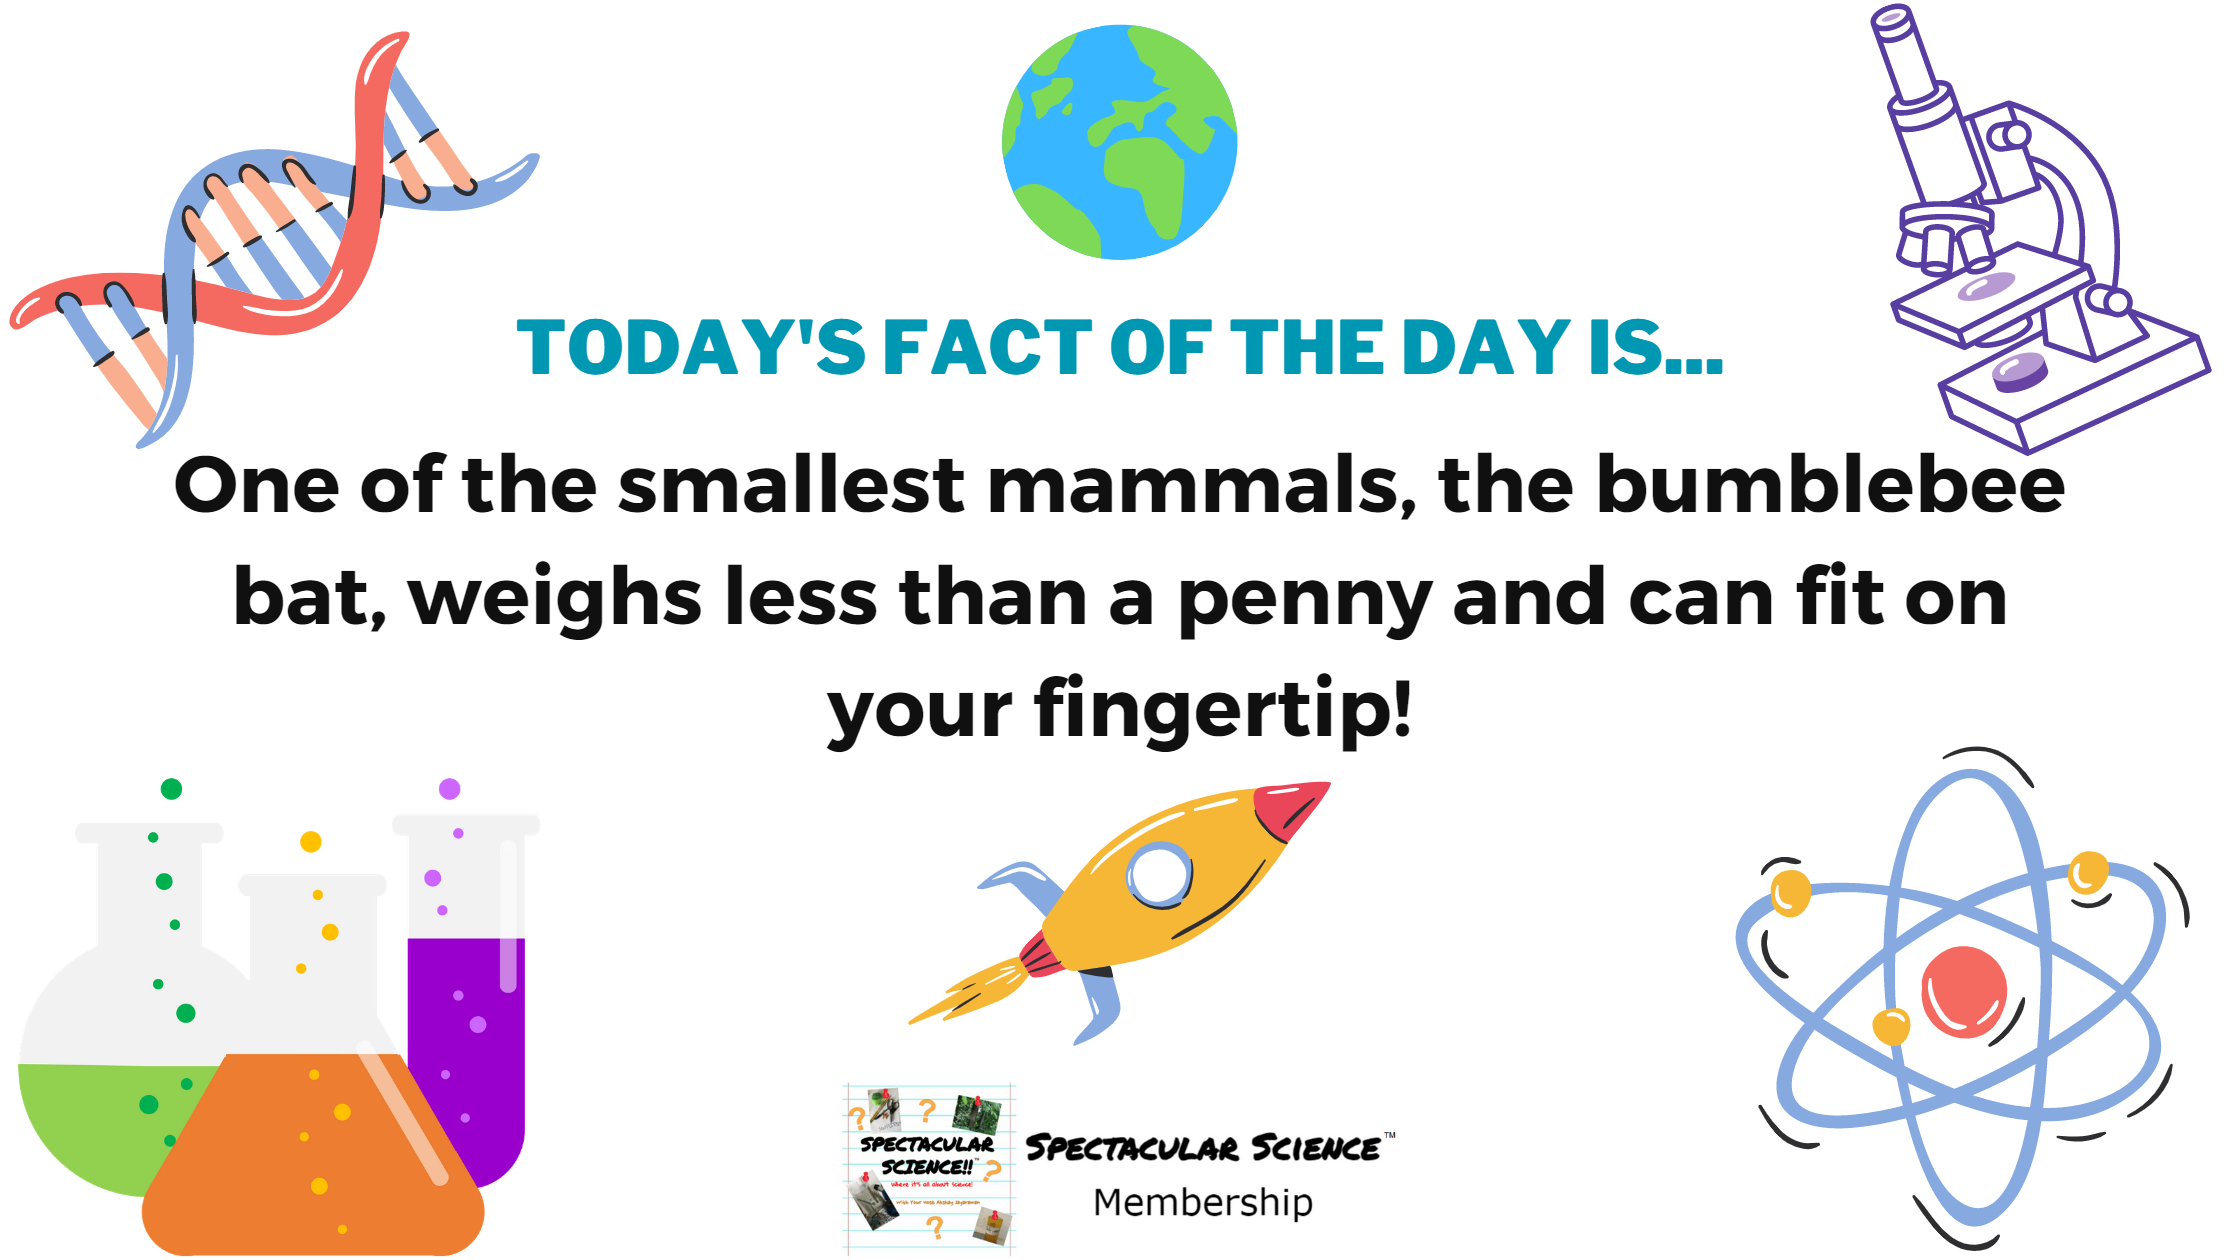 Fact of the Day Image March 7th